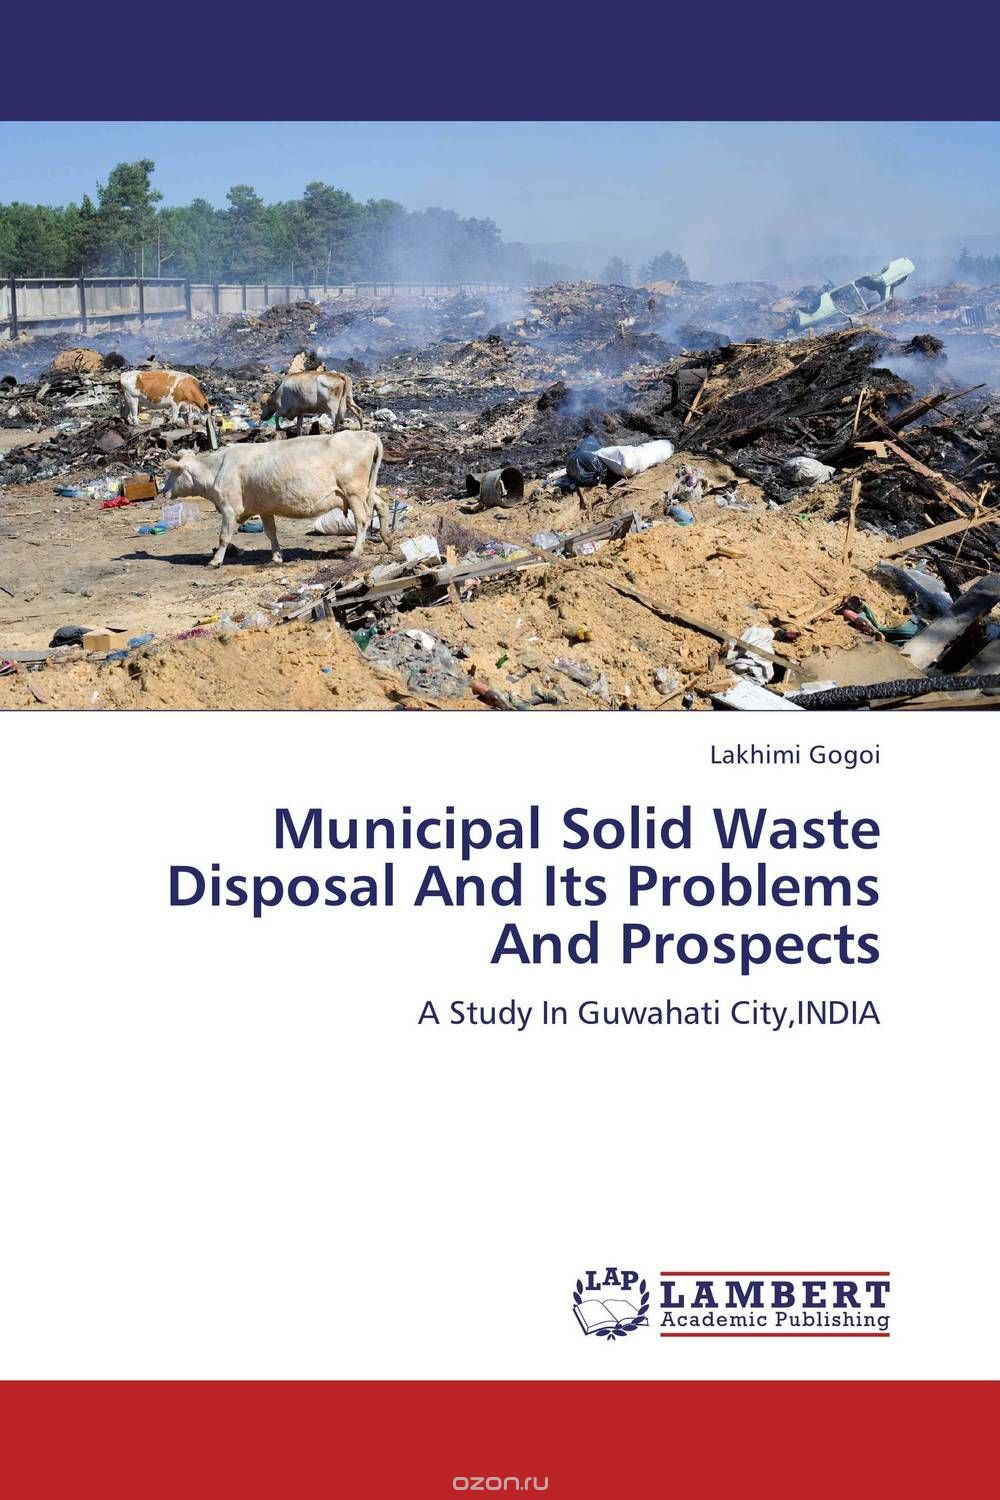 Скачать книгу "Municipal Solid Waste Disposal And Its Problems And Prospects"